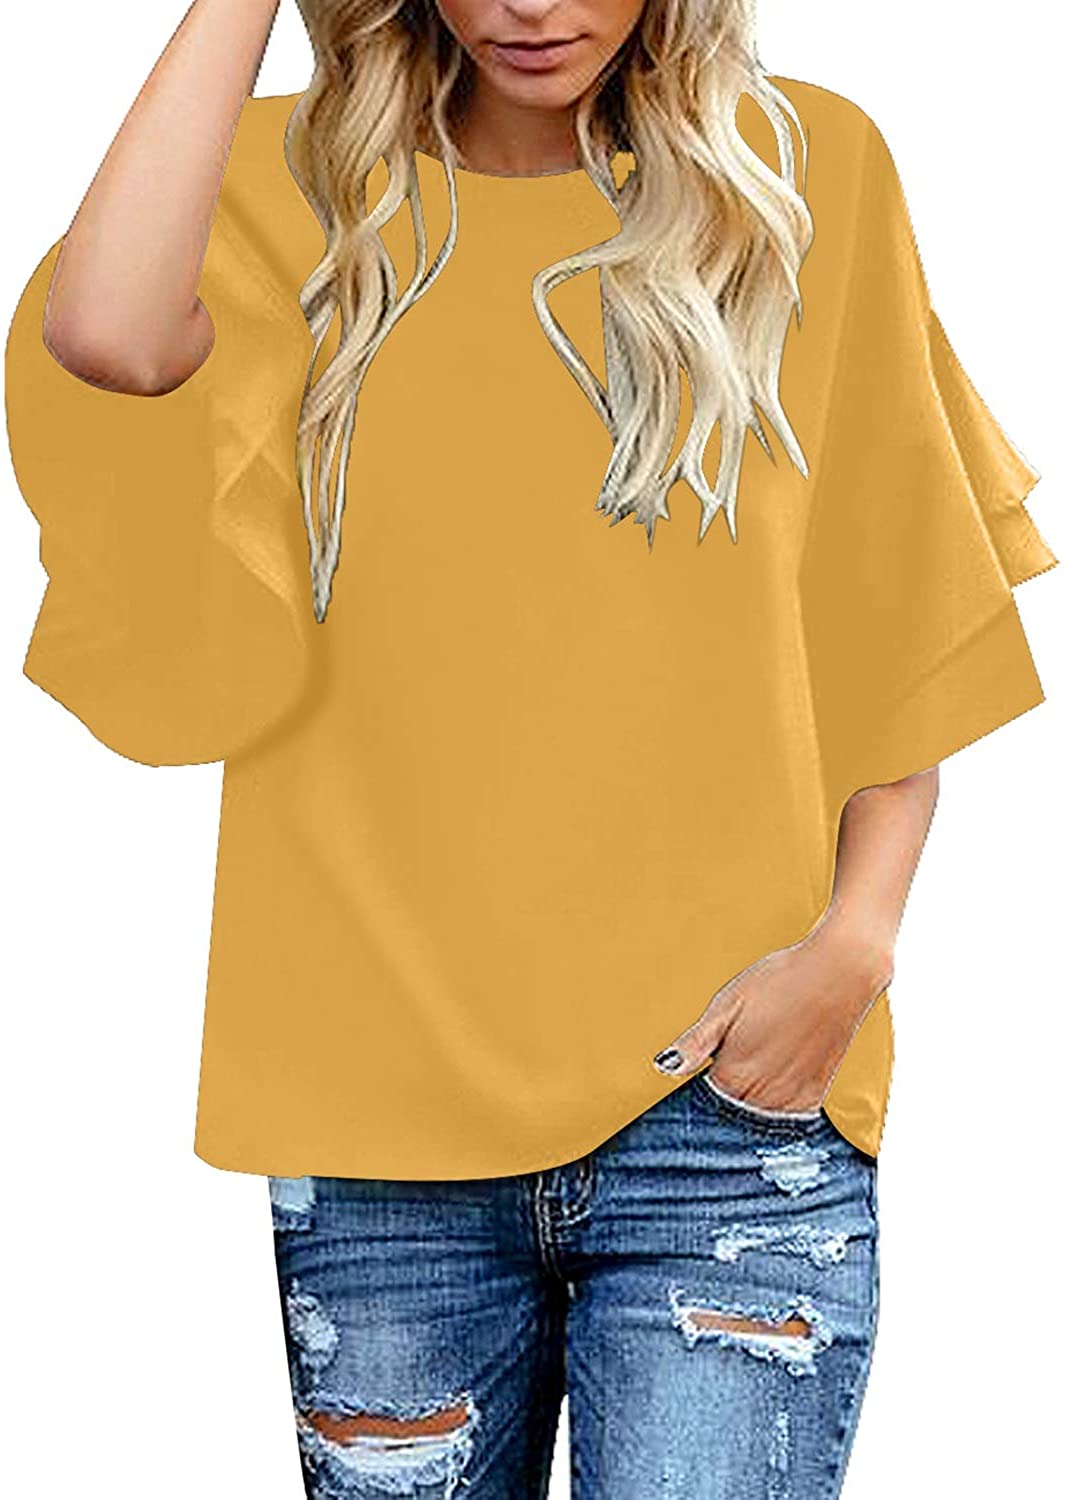 luvamia Womens Casual 3/4 Tiered Bell Sleeve Crewneck Loose Tops Blouses Shirt